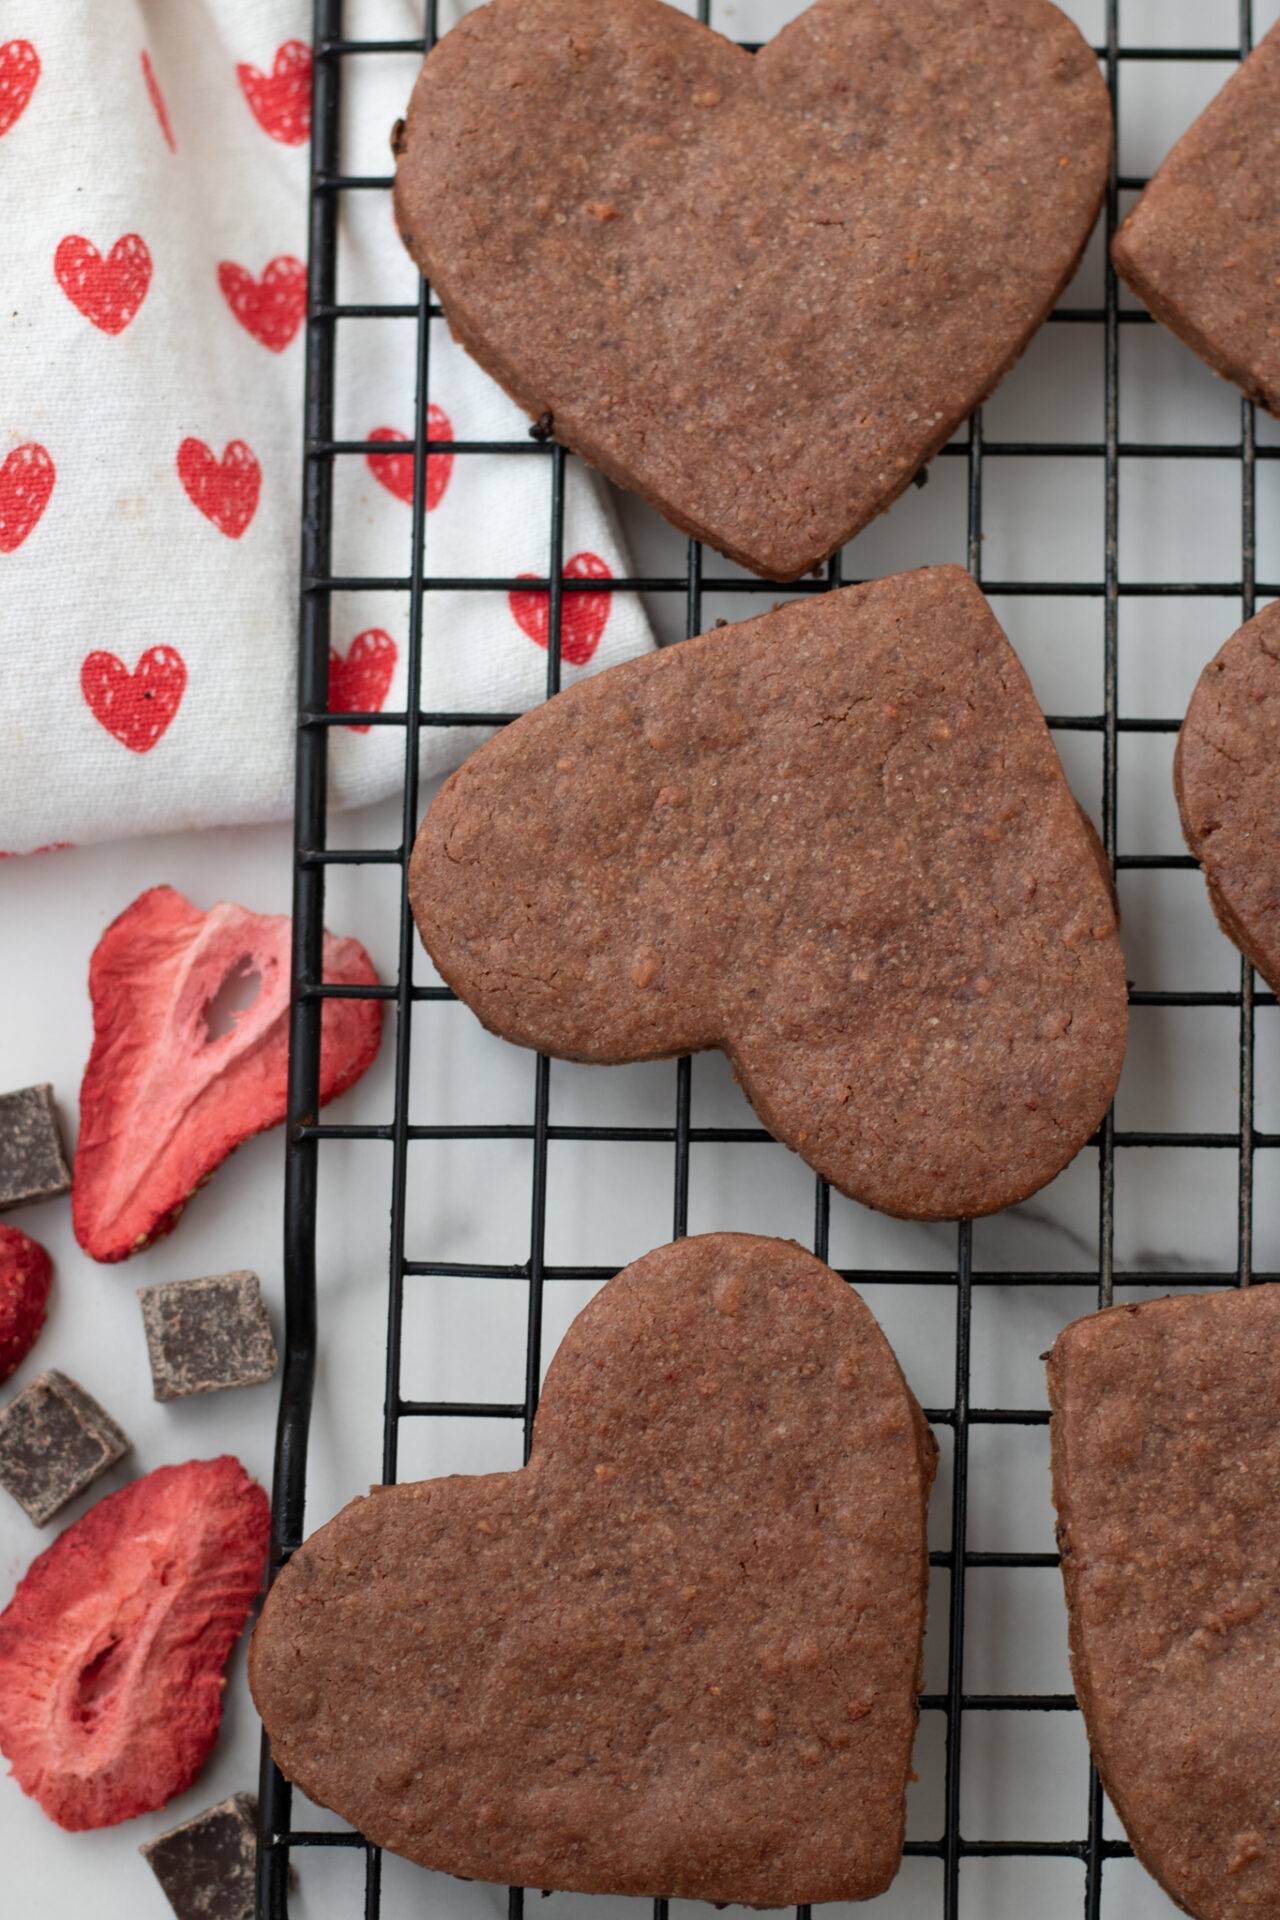 Heart shaped chocolate sugar cookies. There's a dish towel next to the chocolate cookies with little red hearts on it. There's a freeze dried strawberry and some chocolate chunks next to the cookies too.